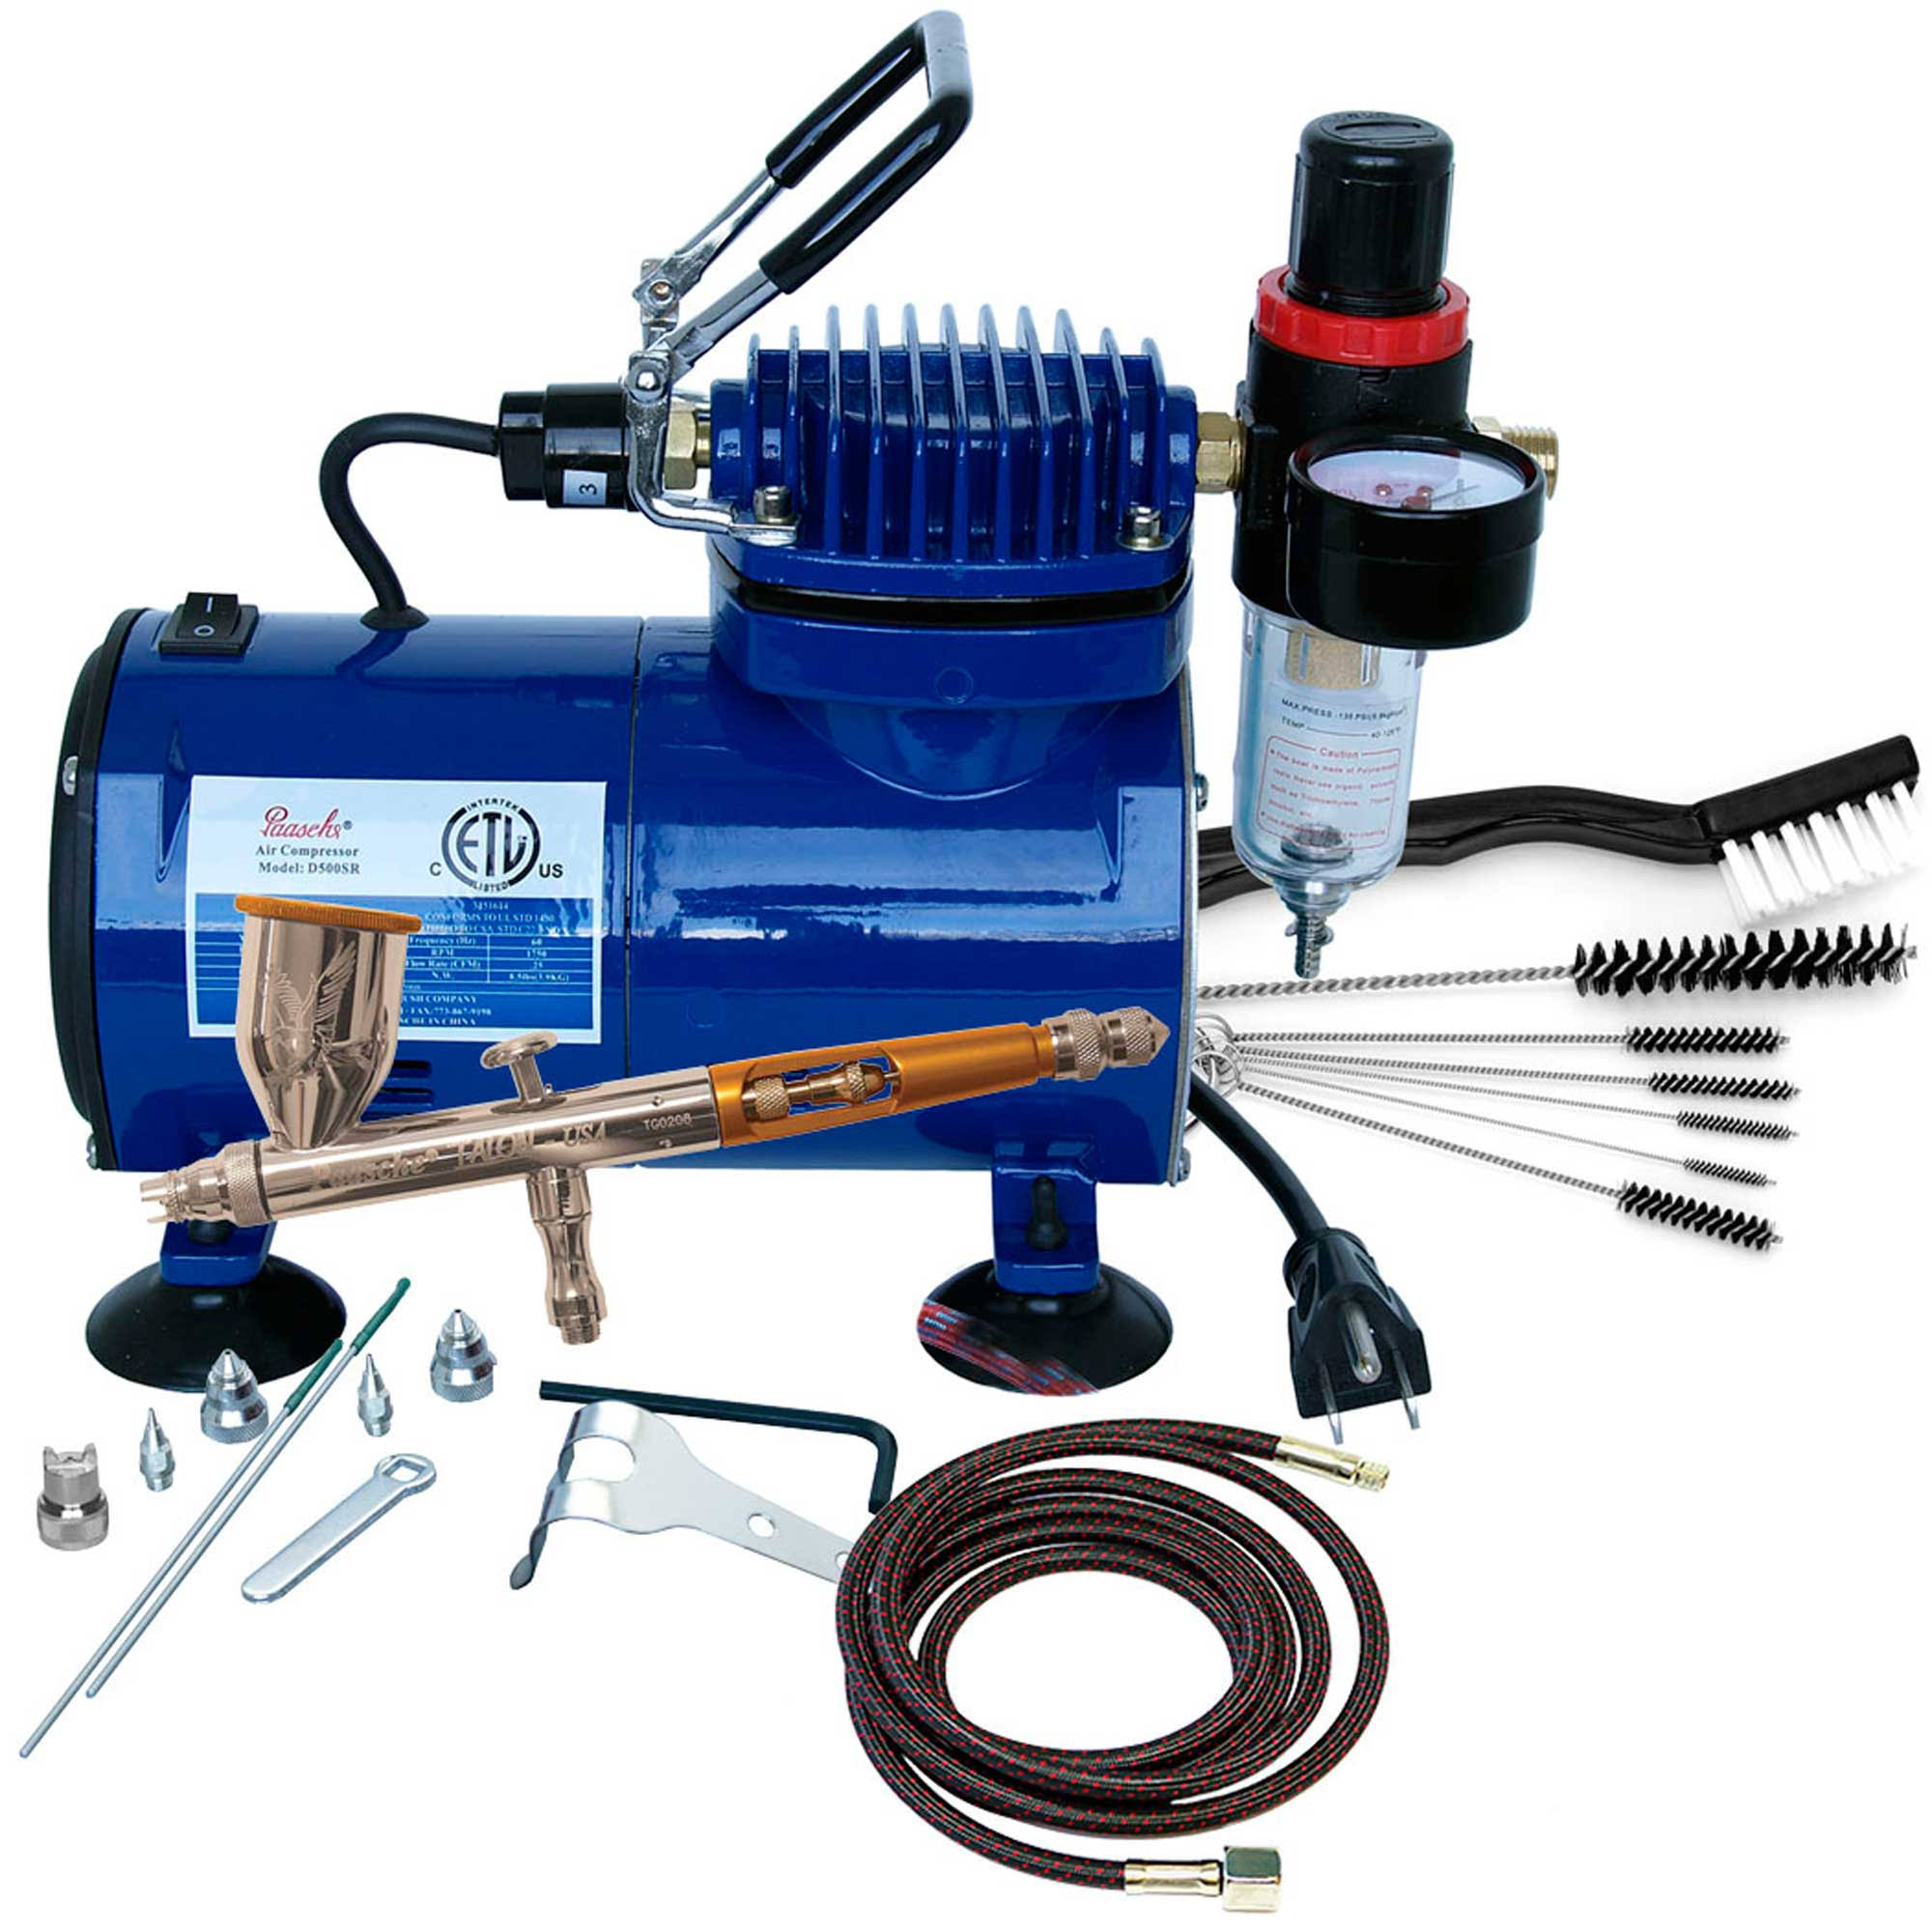 Paasche TG-100D Gravity Feed Airbrush & Compressor Package